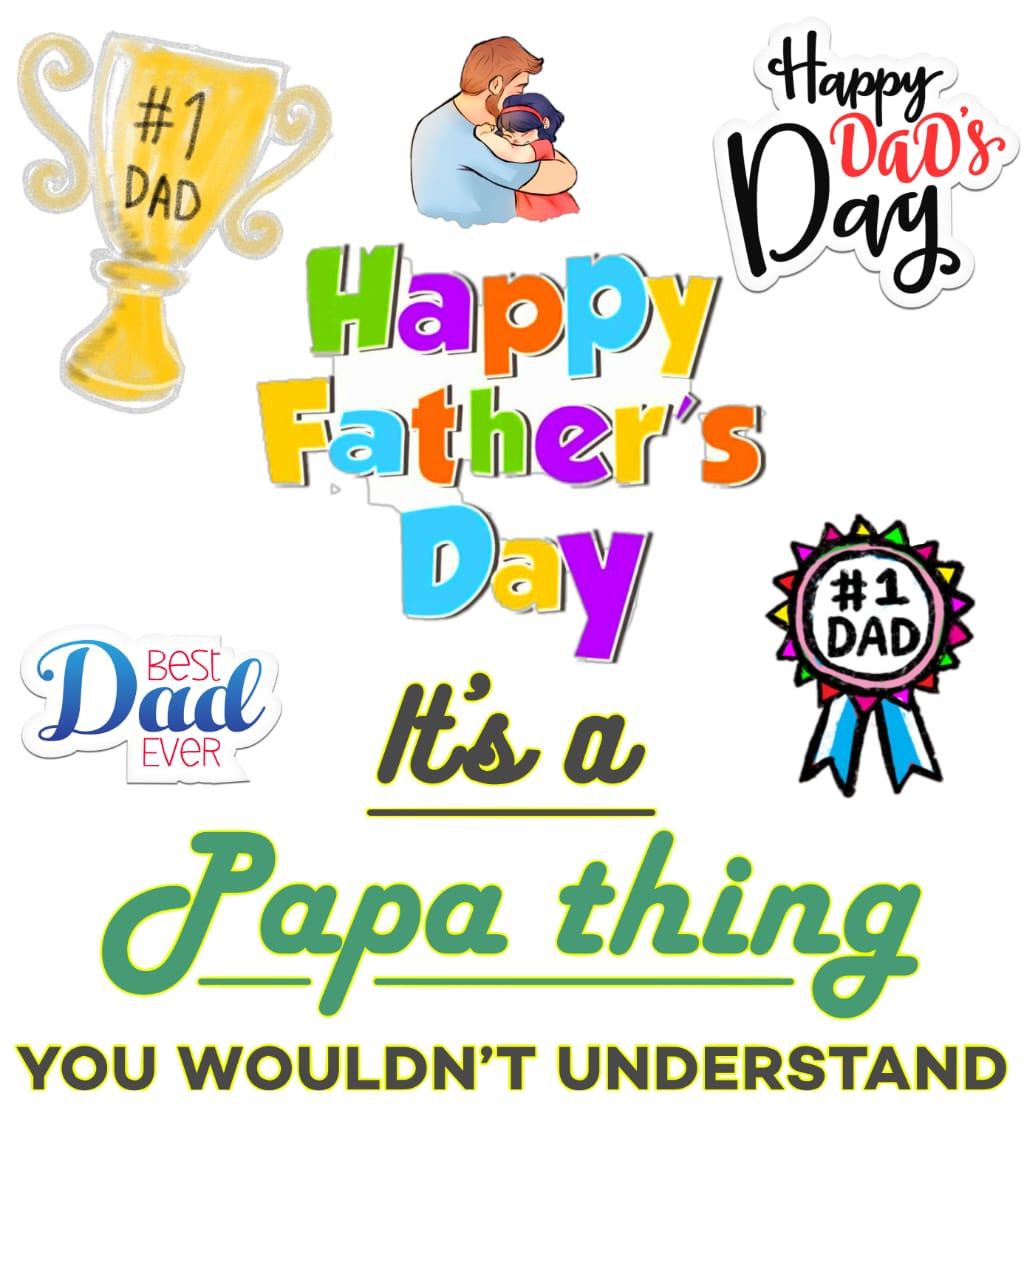 Fathers Day images photos and wallpapers